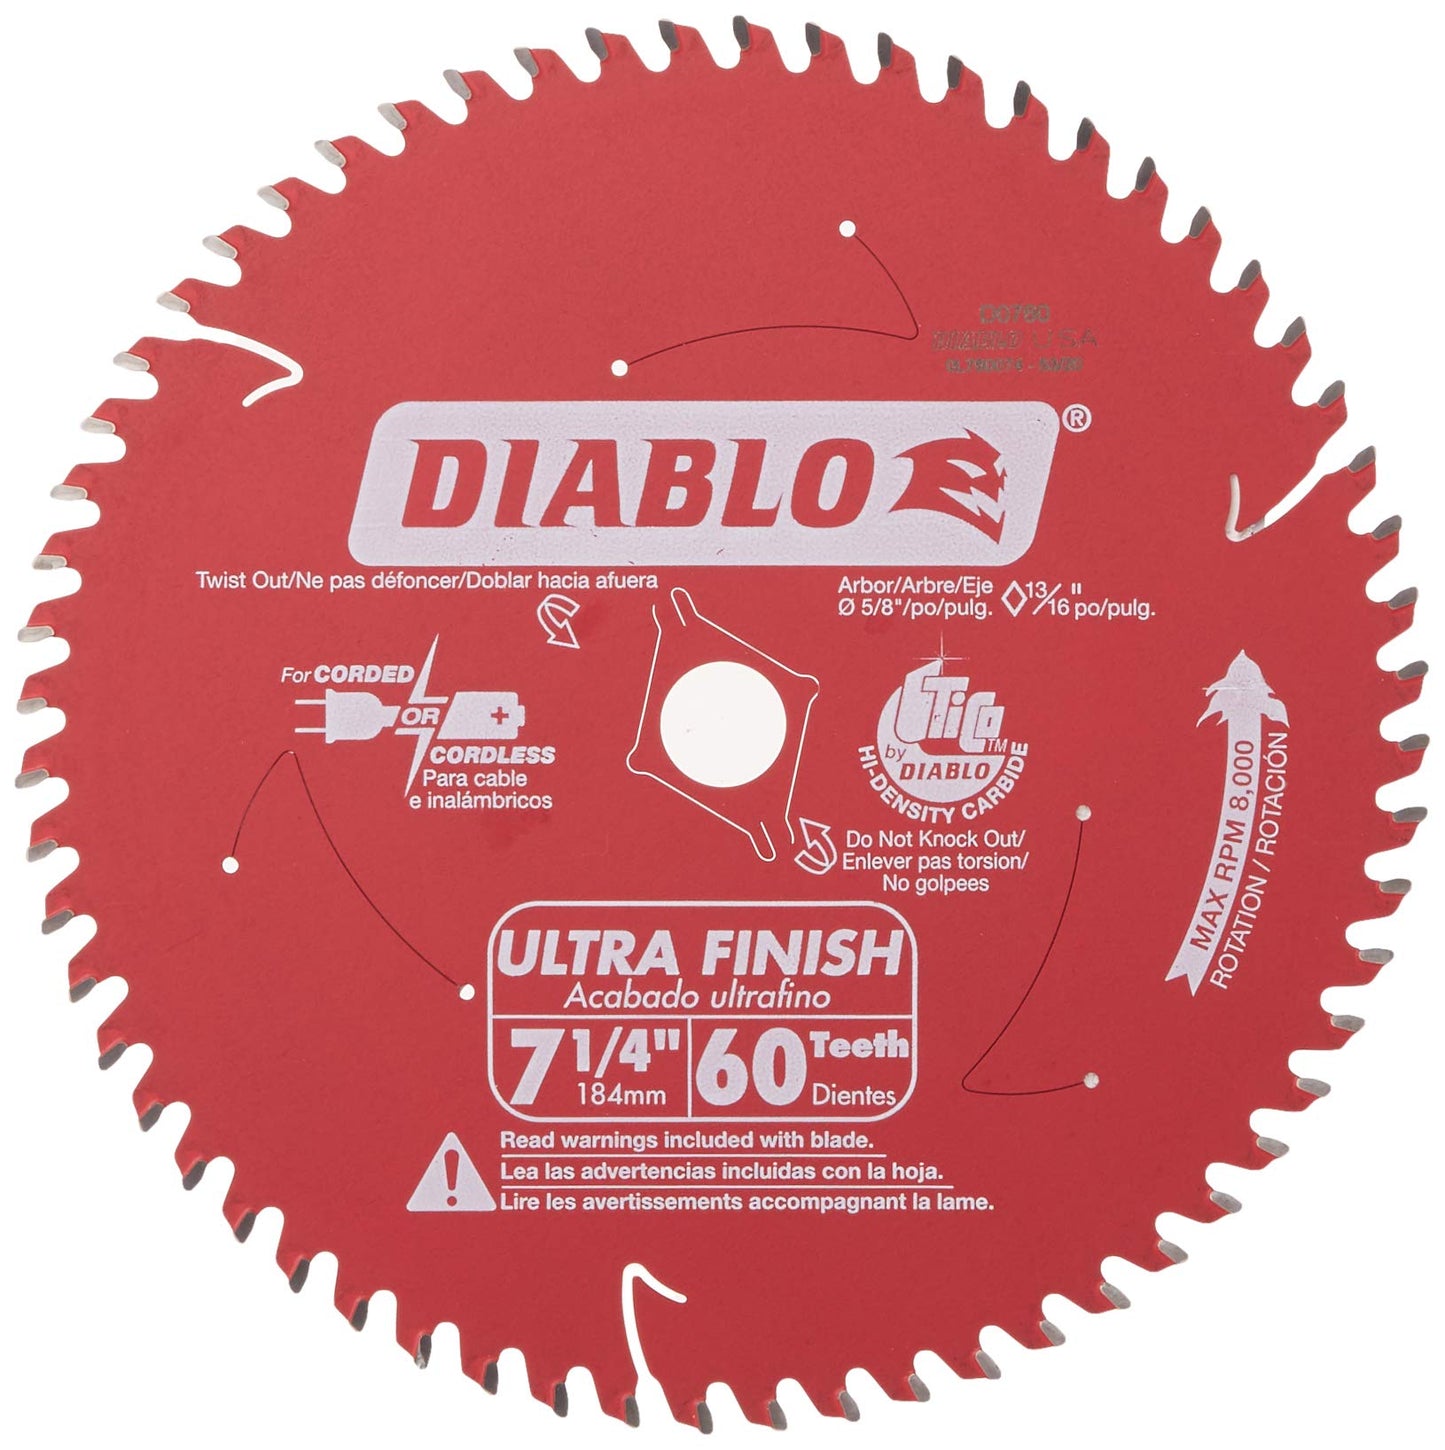 Freud D0760A Diablo 7-1/4" x 60-Tooth Ultra Fine Finishing Circular Saw Blade with 5/8" Arbor and Diamond Knockout Single Blade